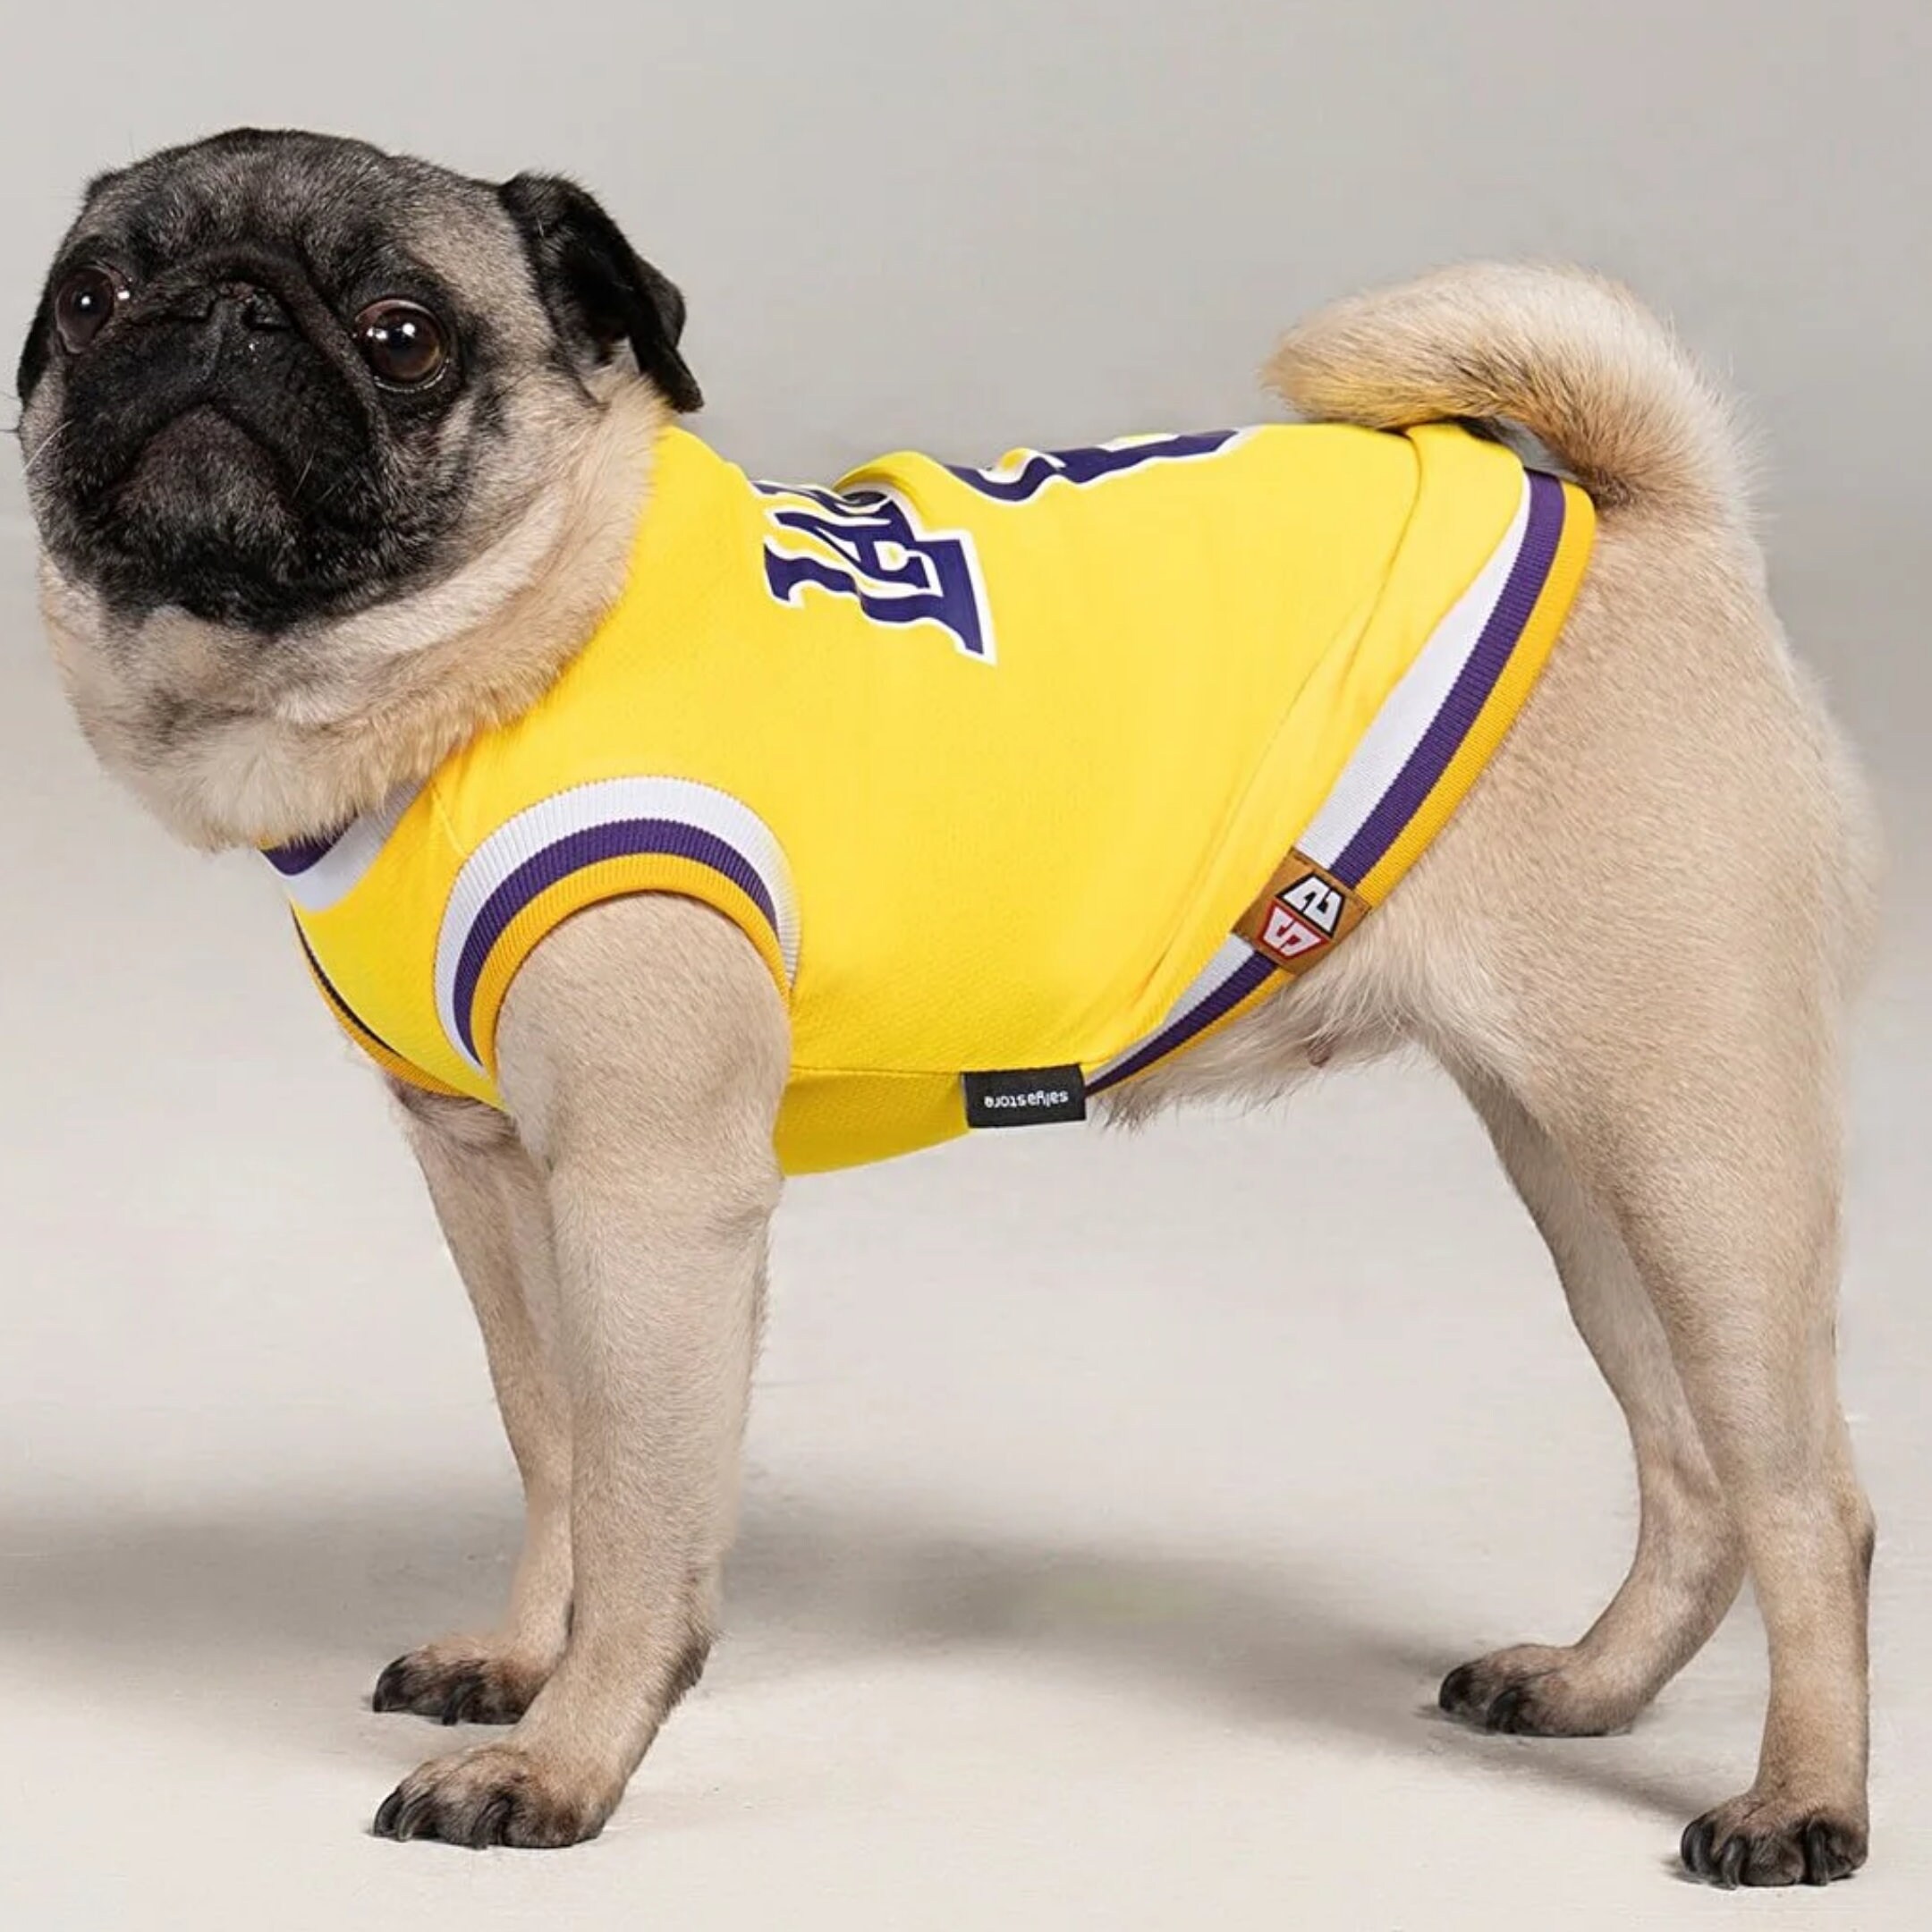 Los Angeles Lakers Dog Jersey, Dog Collar and Leashes